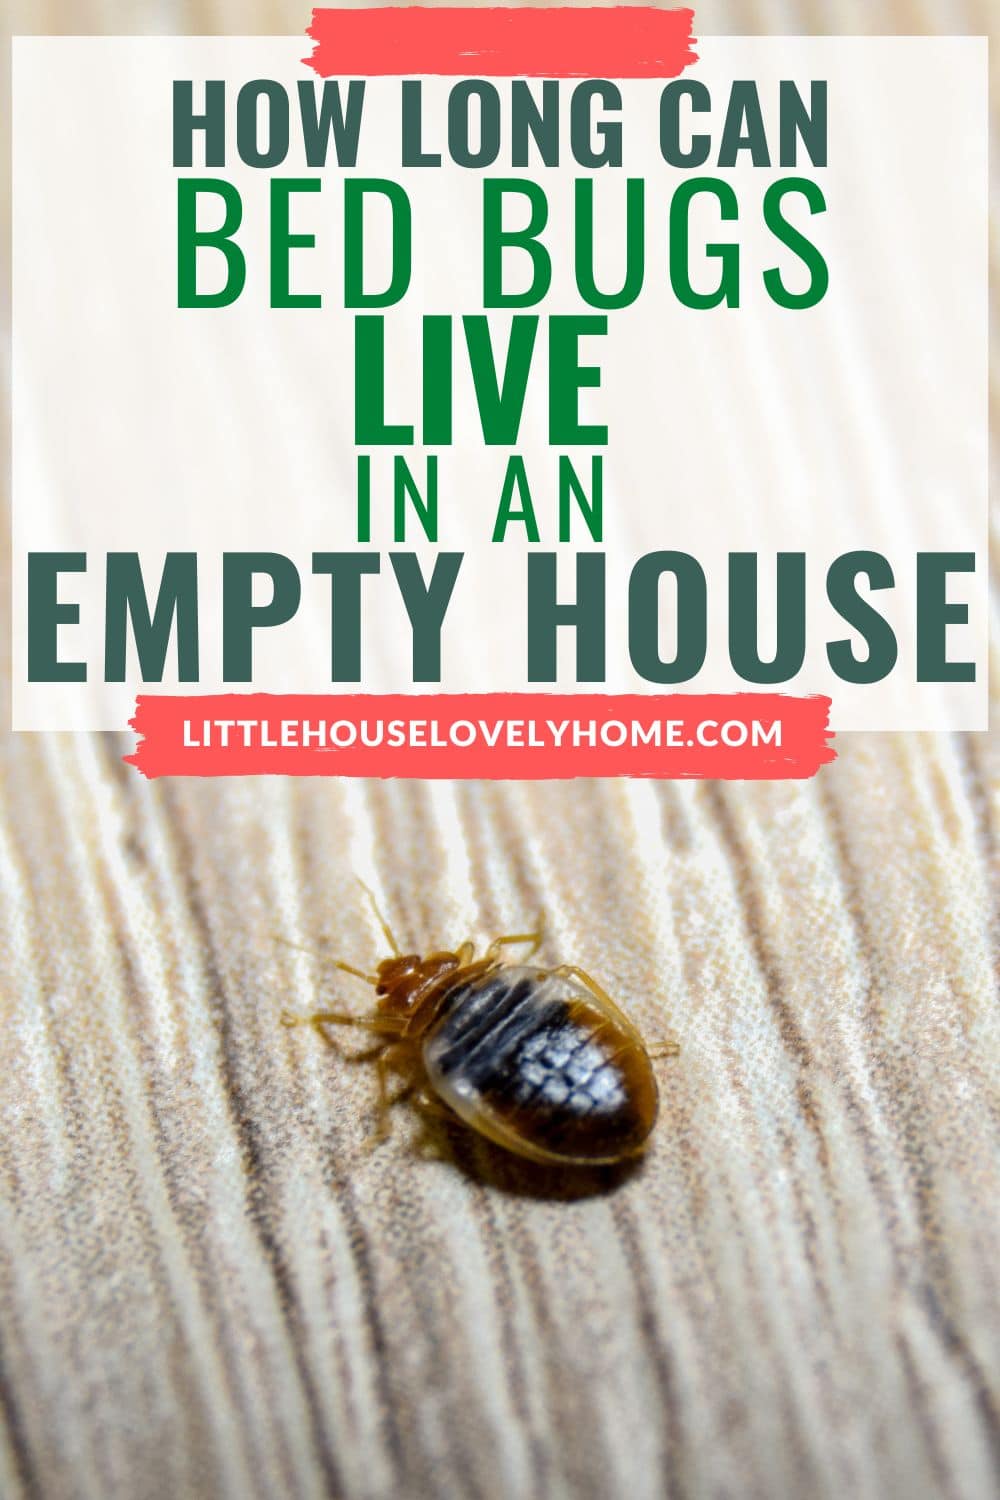 Image showing a bed bug with text overlays that read How long can bed bugs live in an empty house